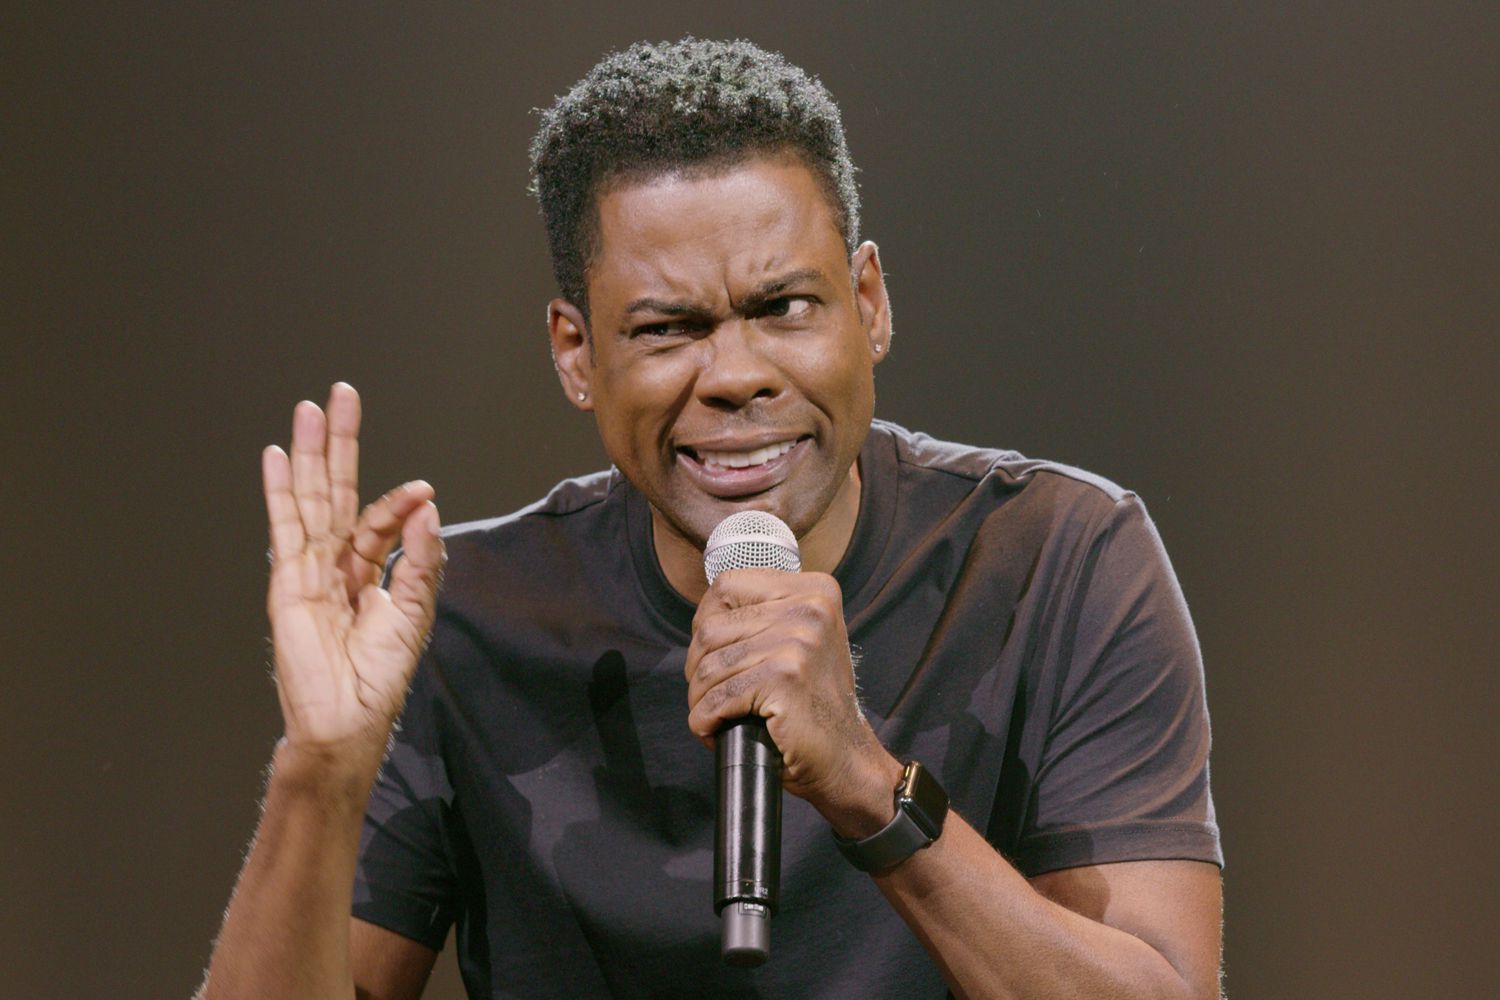 Chris Rock Reveals He Has COVID, Urges Followers to Get Vaccinated: 'Trust Me You Don't Want This' - msnNOW